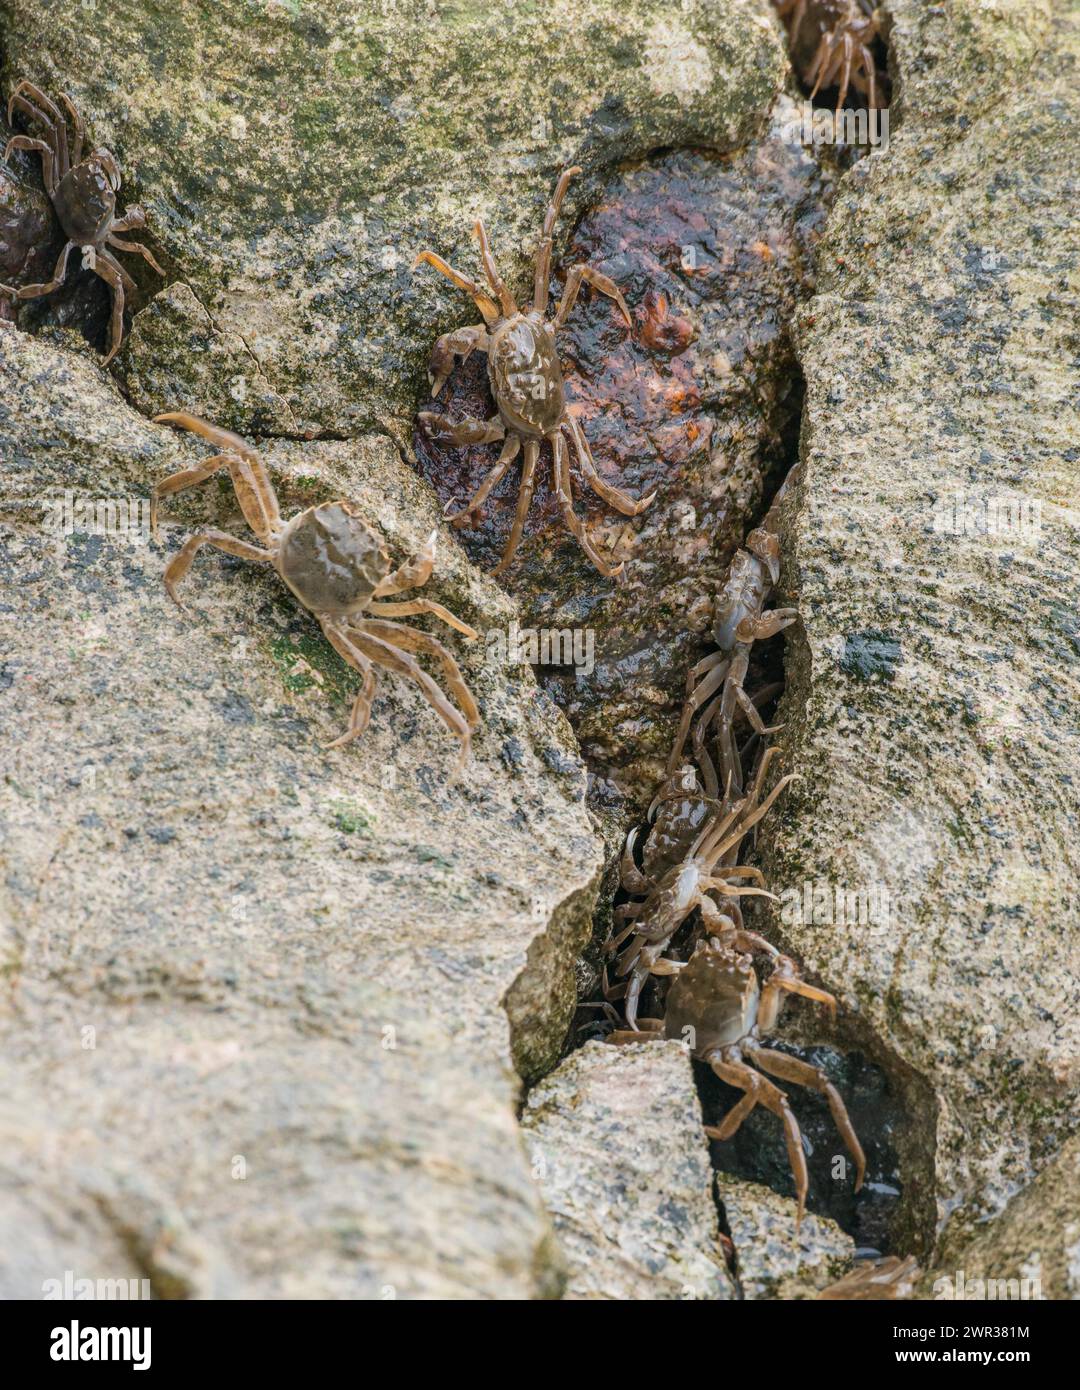 Many chinese mitten crab (Eriocheir sinensis), invasive species, neozoon, crabs, juveniles, hiding in a narrow crack between stones and crawling over Stock Photo